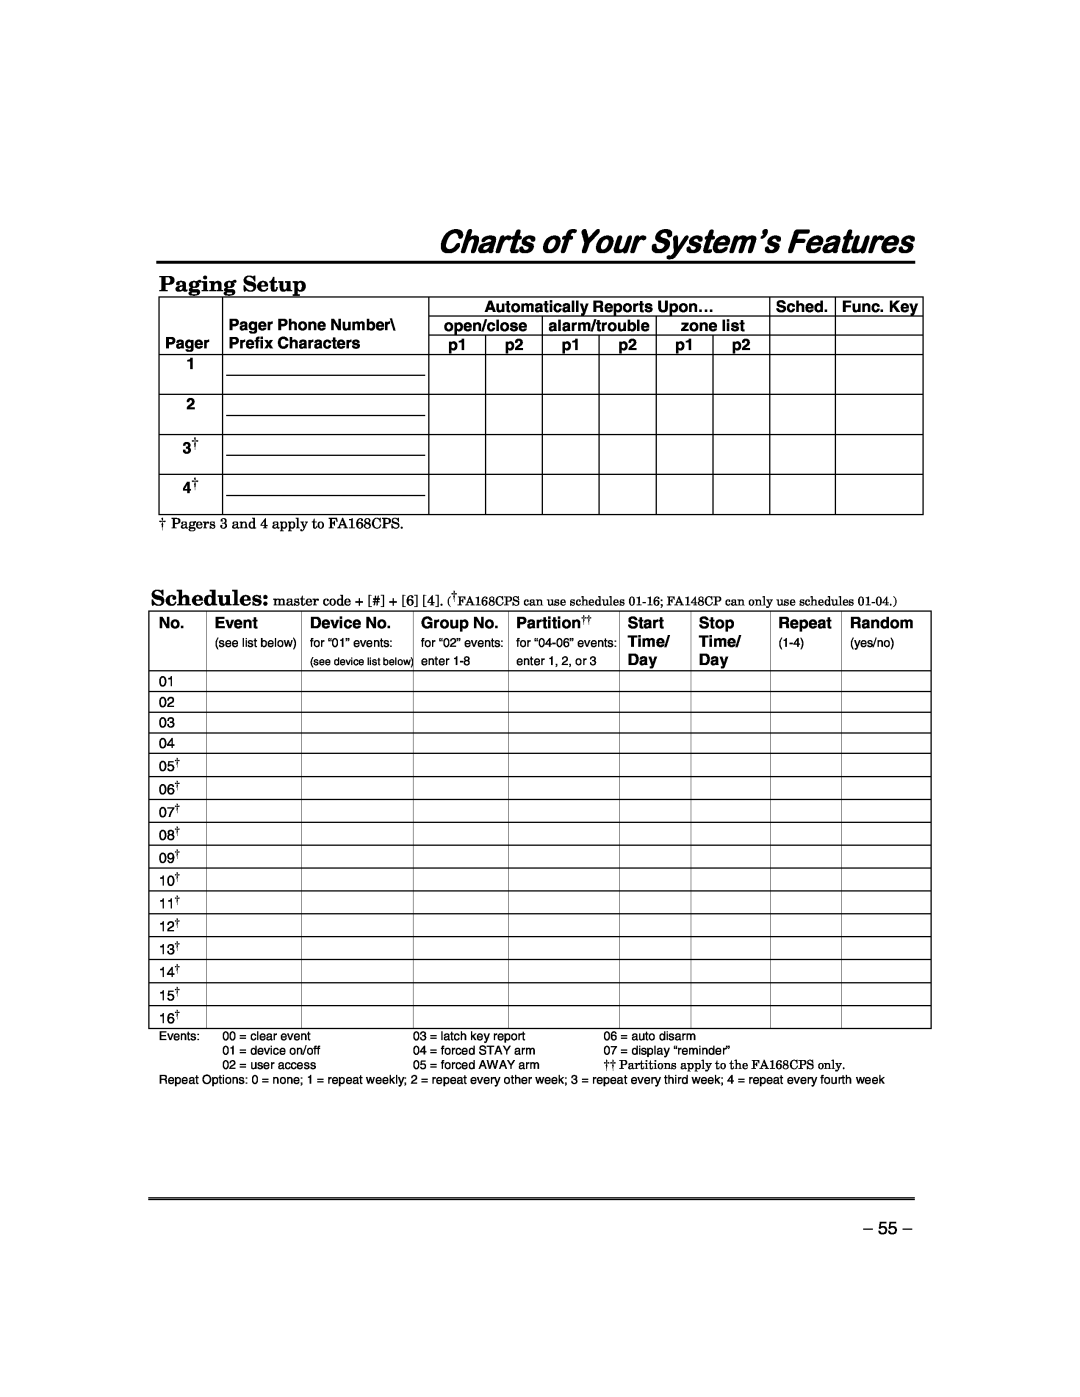 First Alert FA168CPSSIA, FA148CPSIA manual Paging Setup, Charts of Your System’s Features 